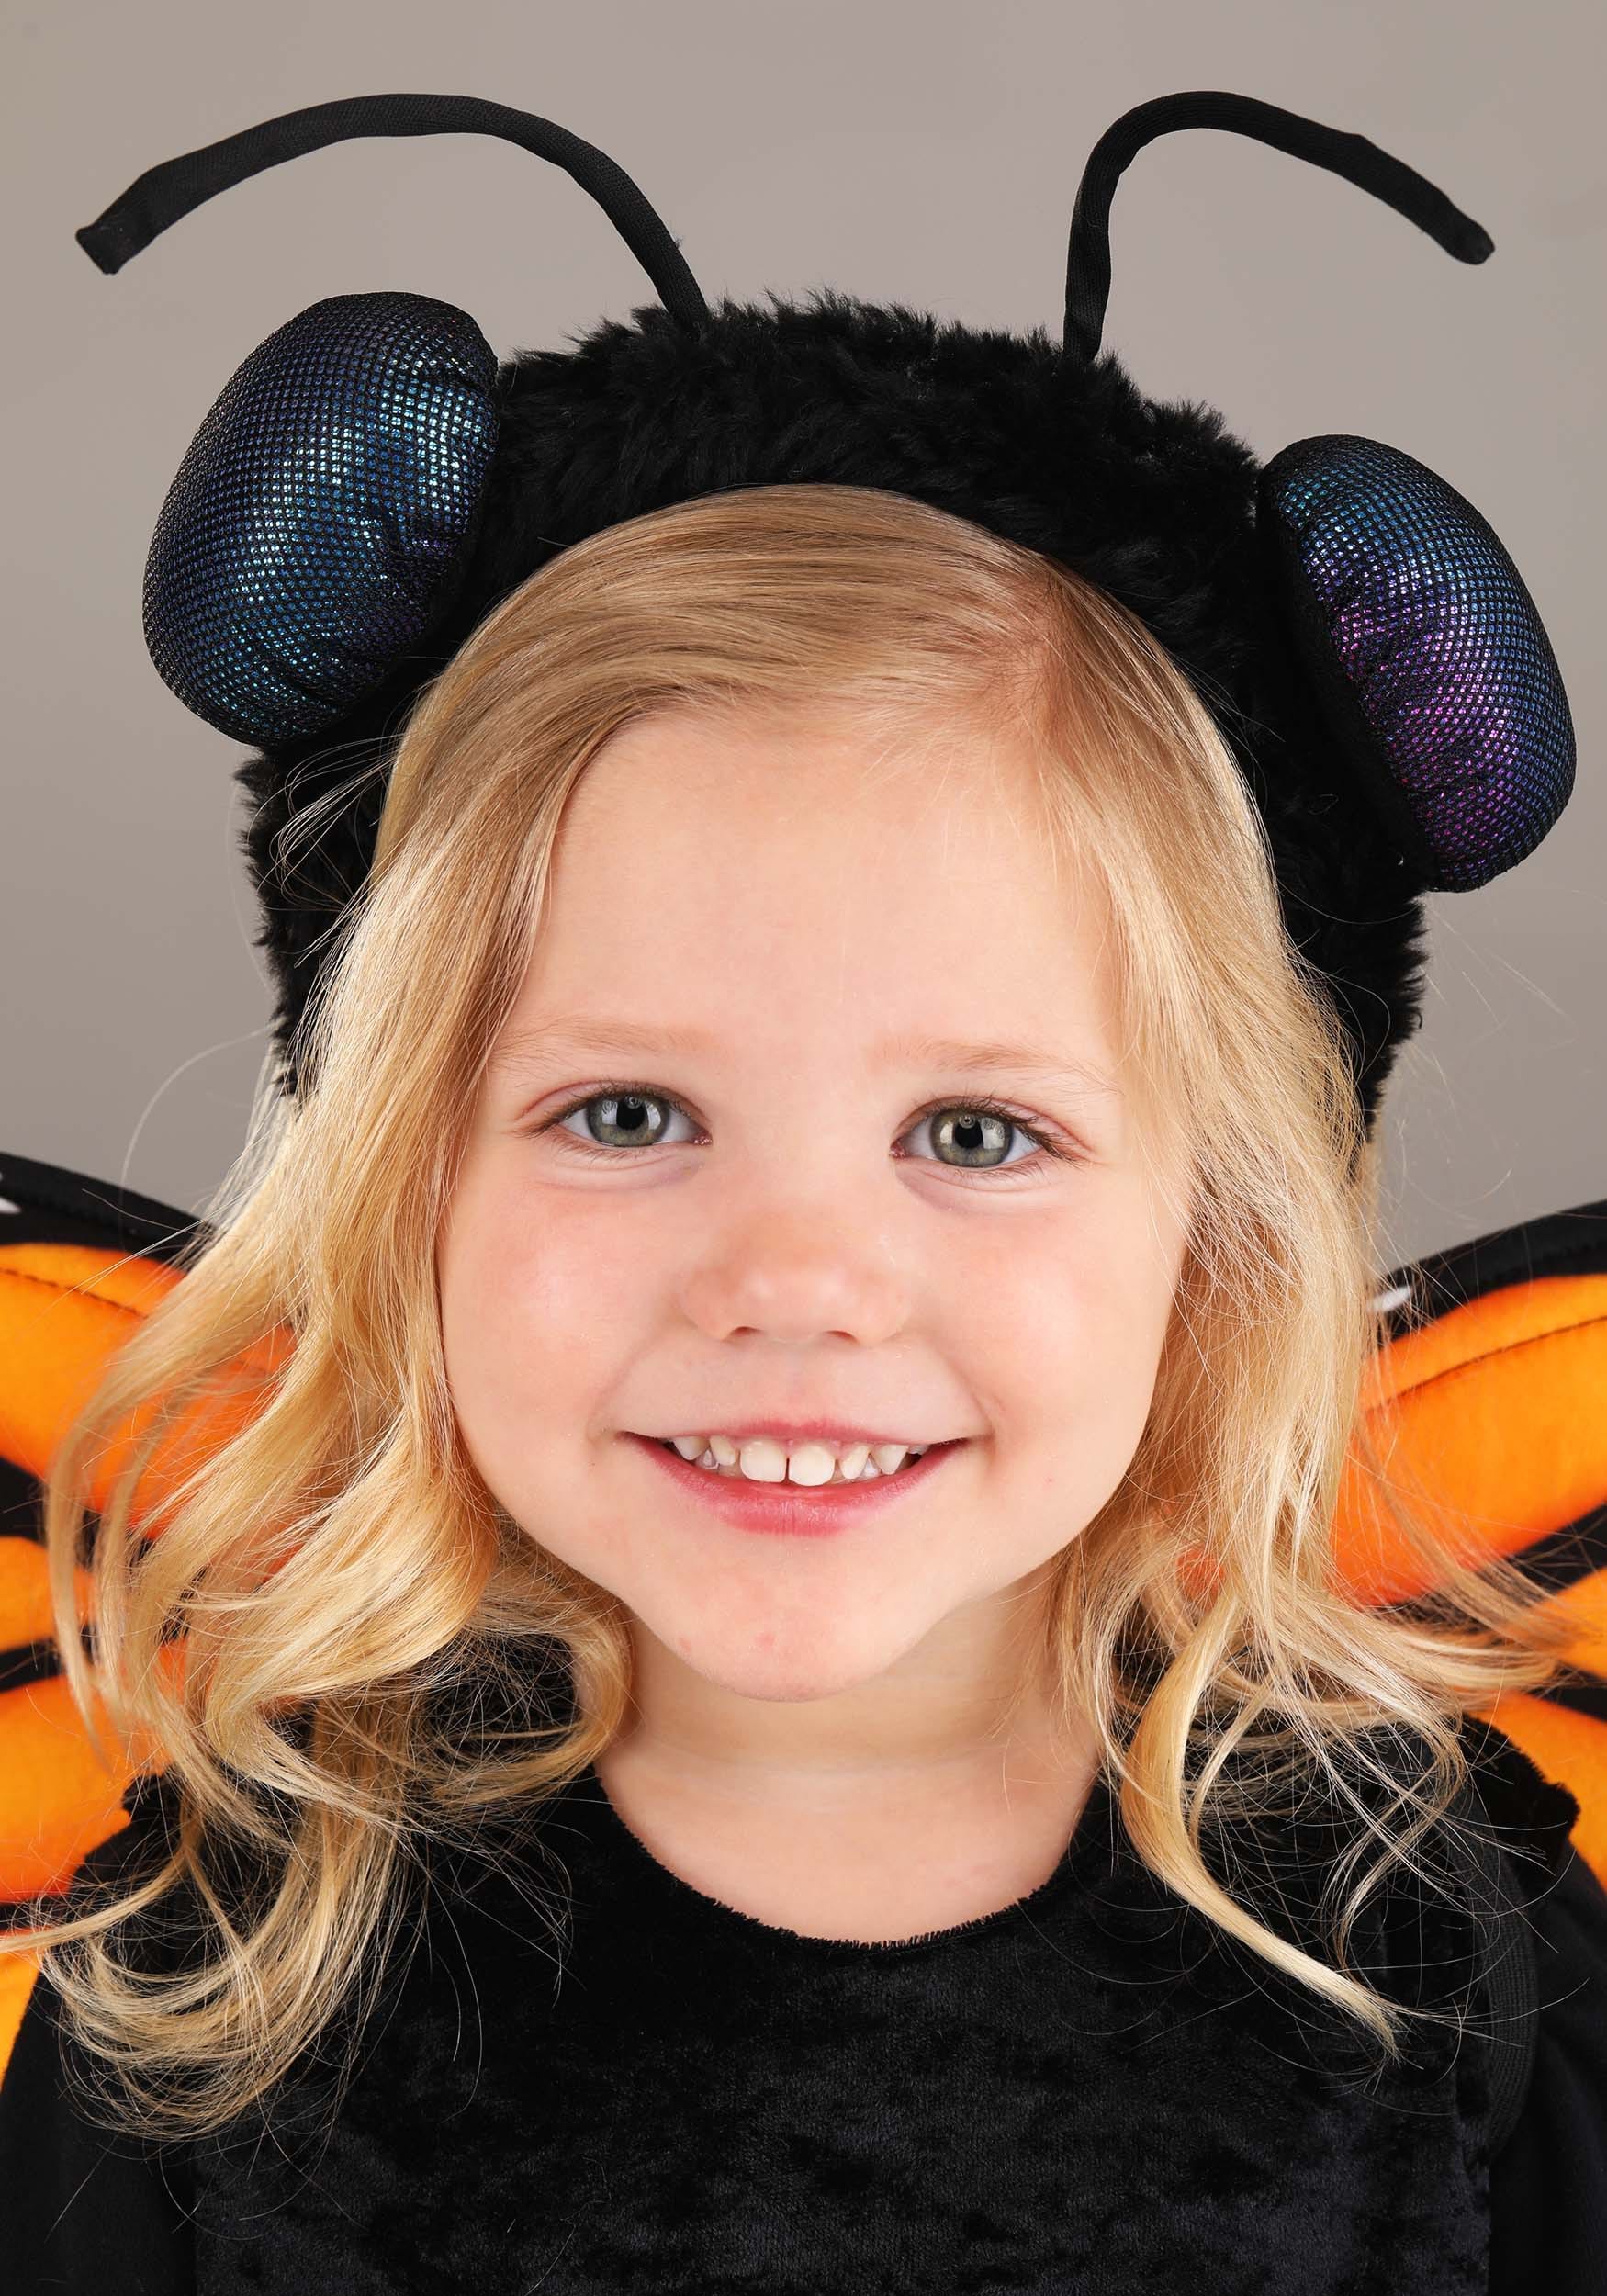 Bubble Butterfly Toddler Costume